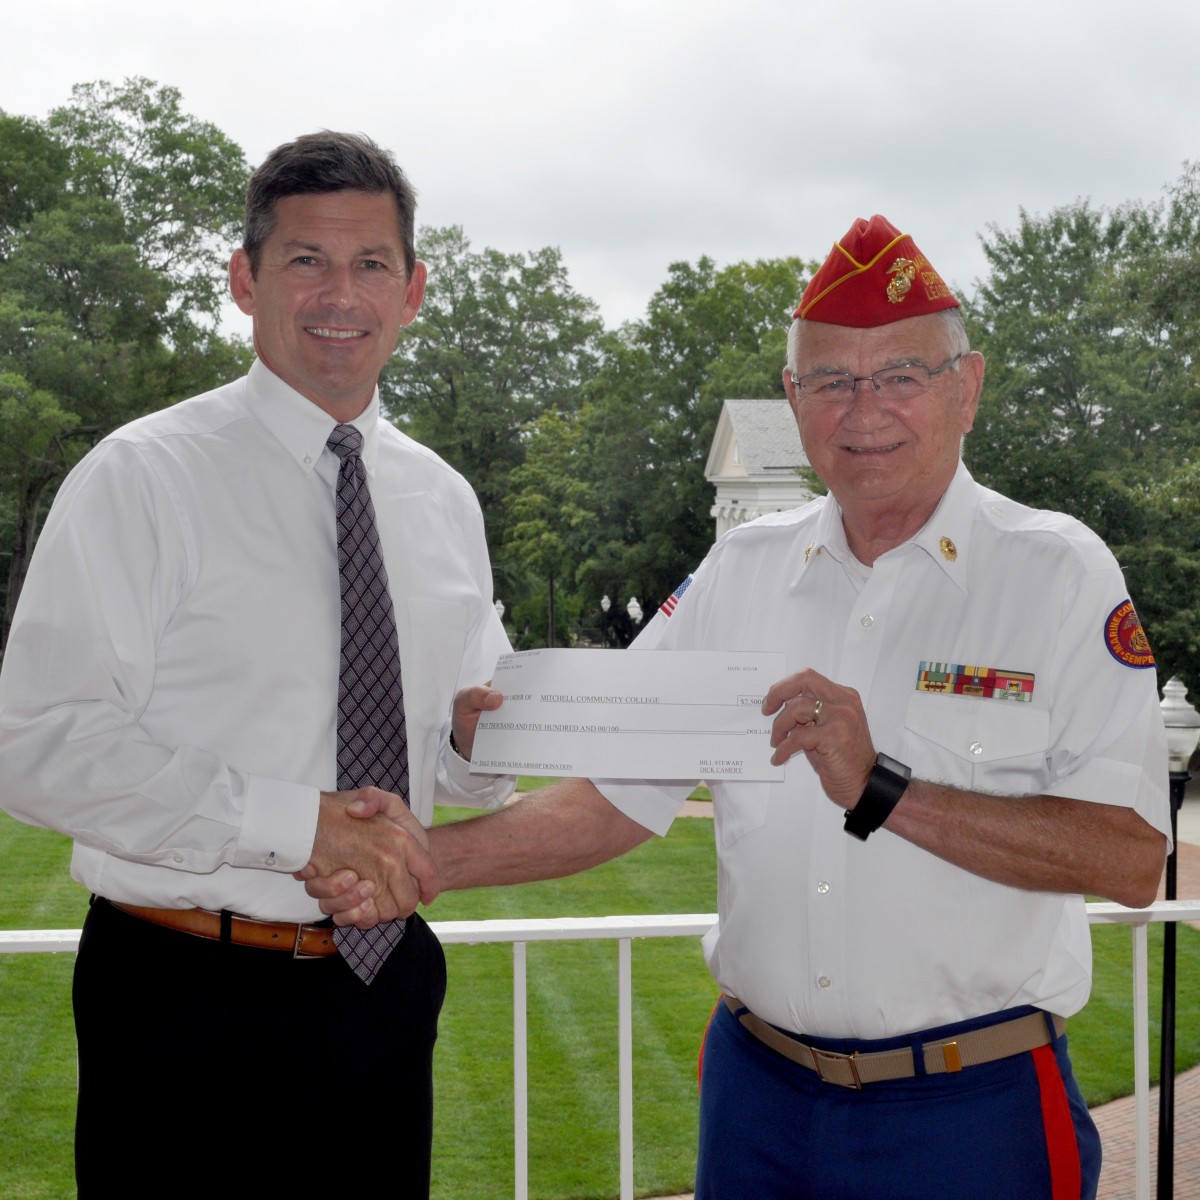 Dr. Tim Brewer, President, Mitchell Community College and Dick Camery, Commandant, Marine Corps League of Iredell County